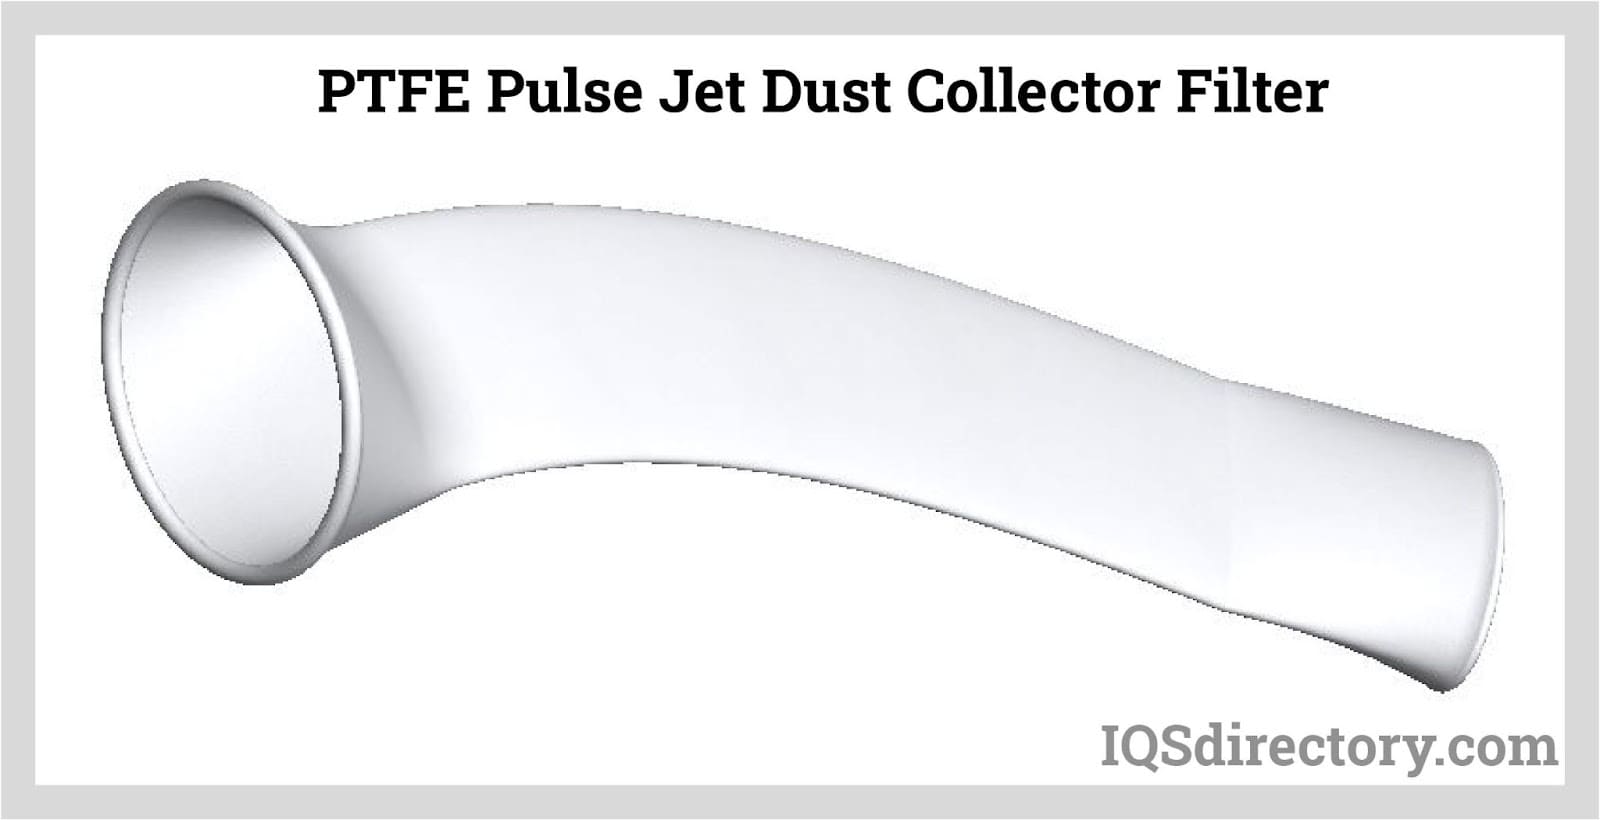 PTFE Pulse Jet Dust Collector Filter